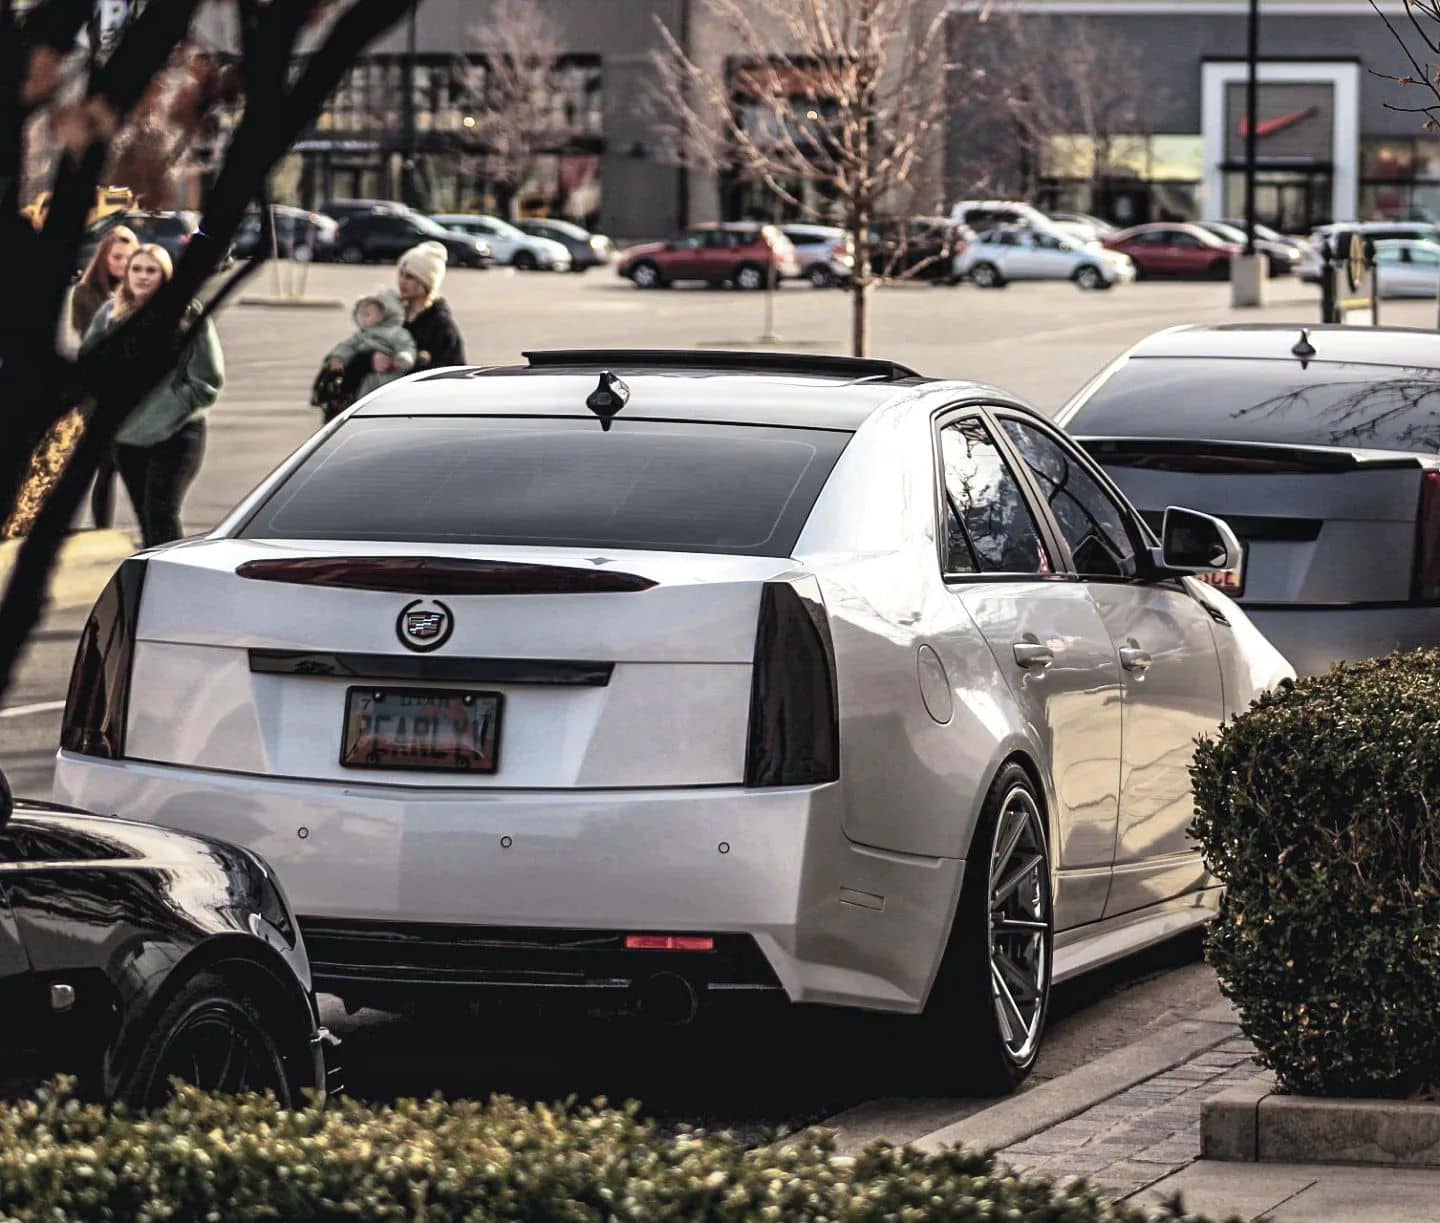 2nd gen Cadillac CTS exterior mods, lip spoiler and black LED taillights tint